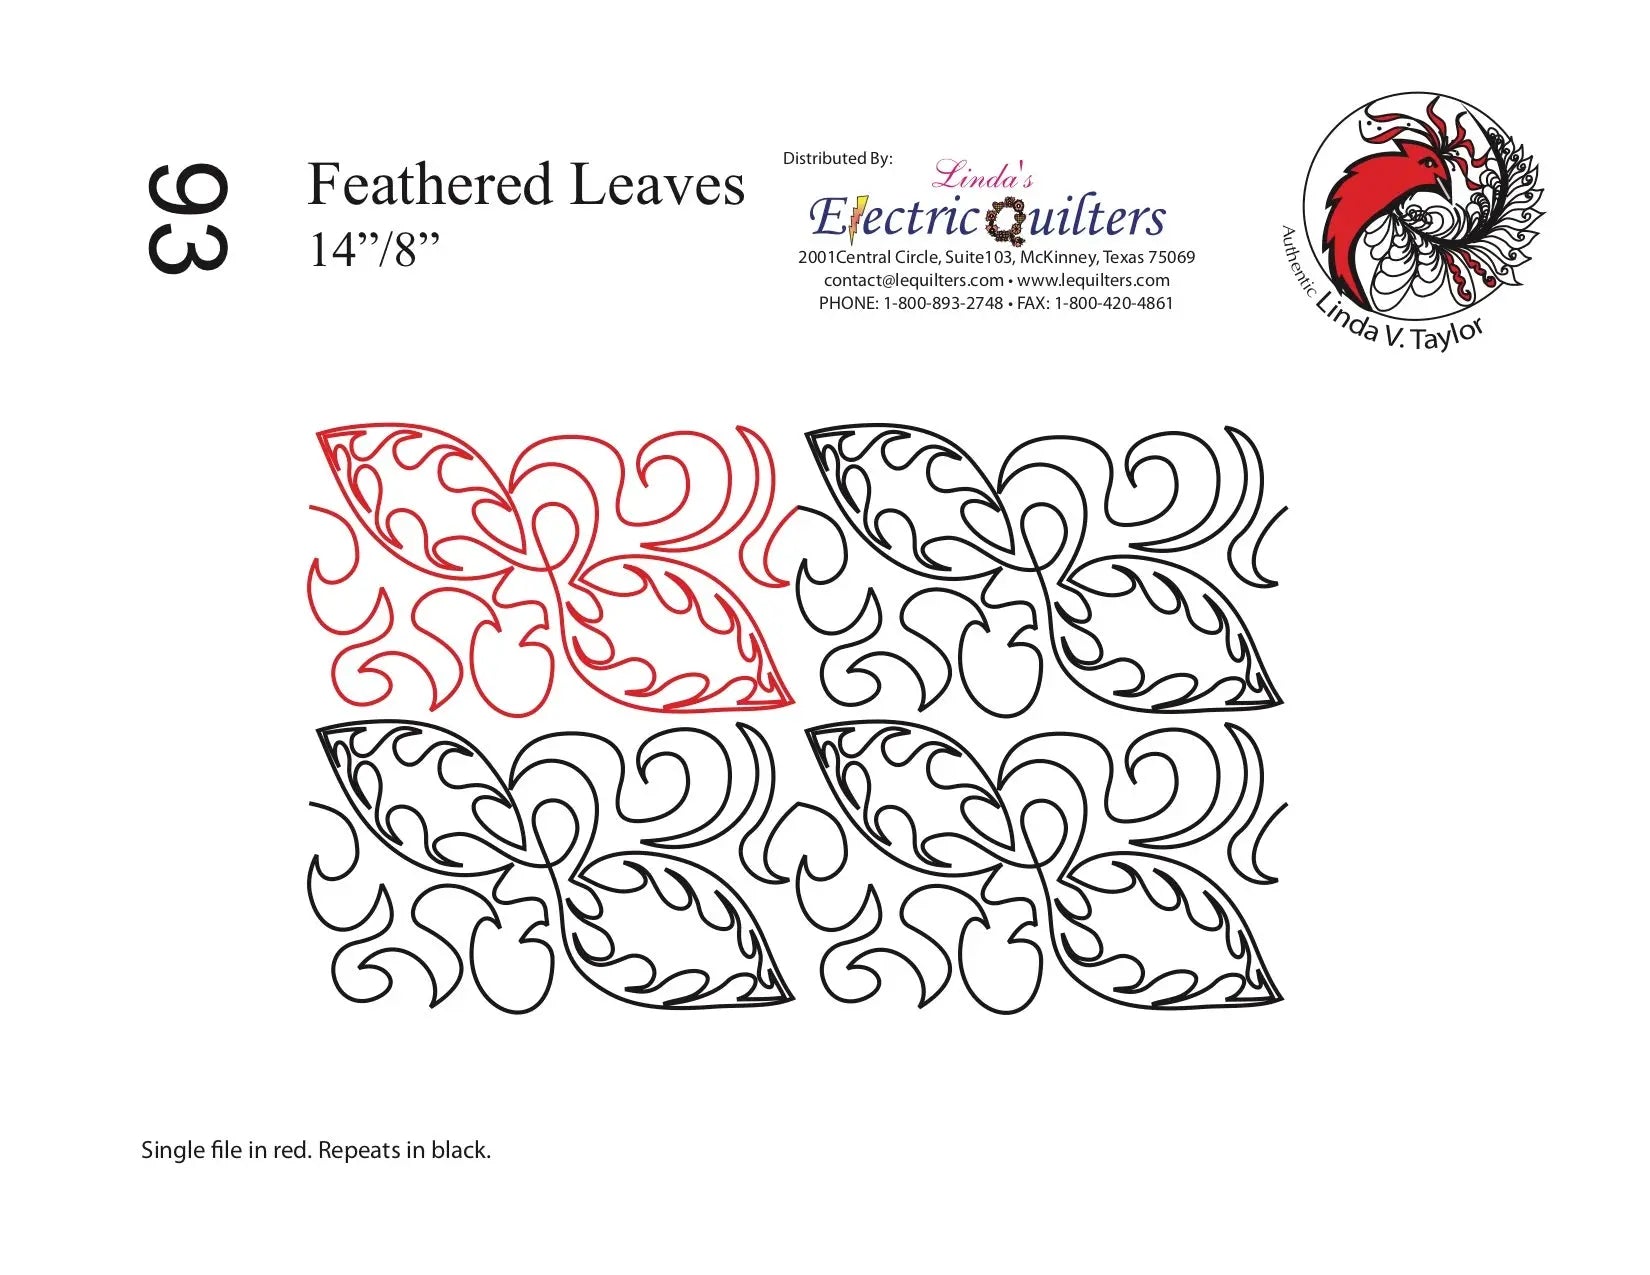 093 Feathered Leaves Pantograph by Linda V. Taylor - Linda's Electric Quilters